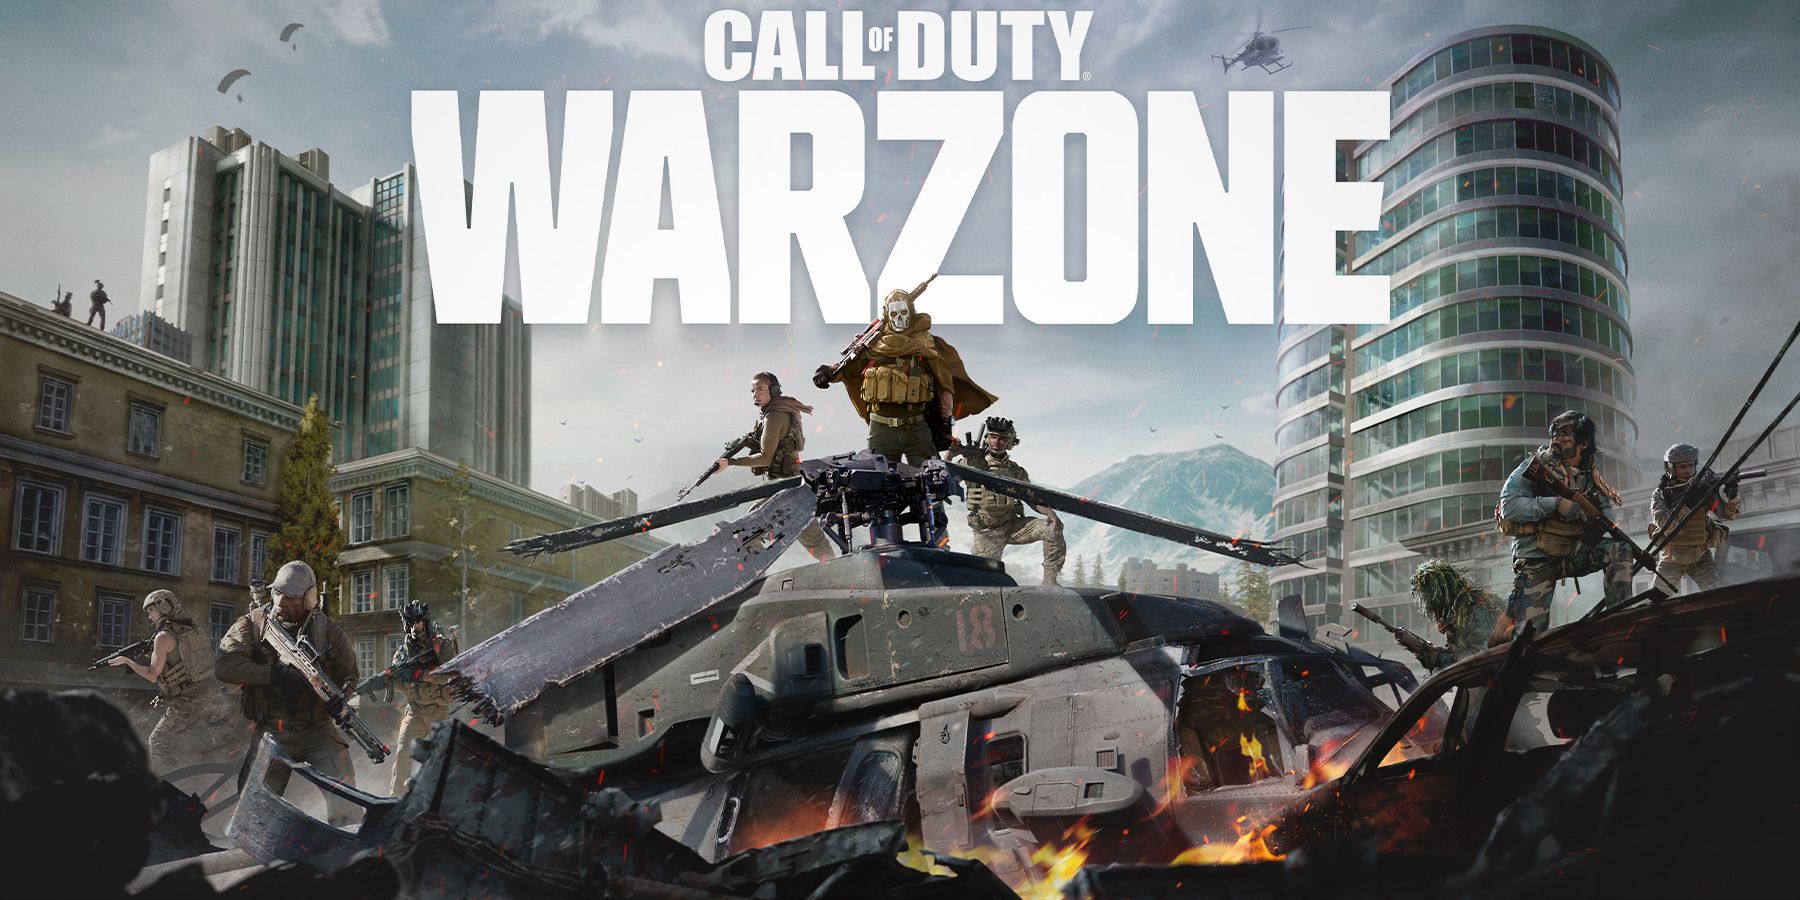 Call of Duty Warzone crashed helicopter promo